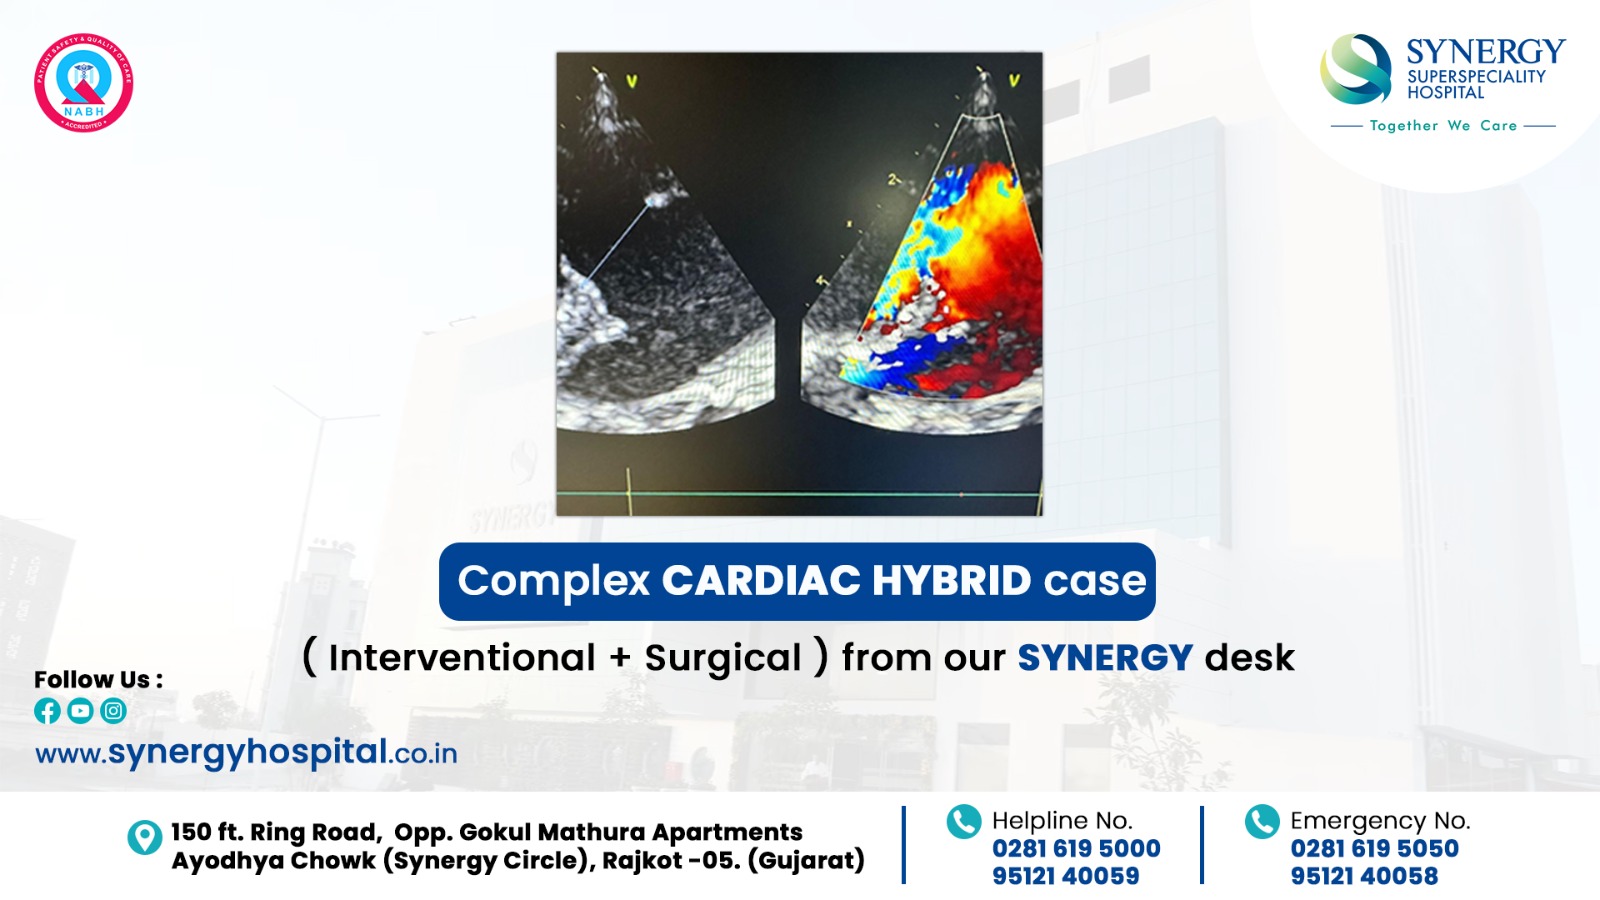 Complex CARDIAC HYBRID case (Interventional + Surgical) from our SYNERGY desk